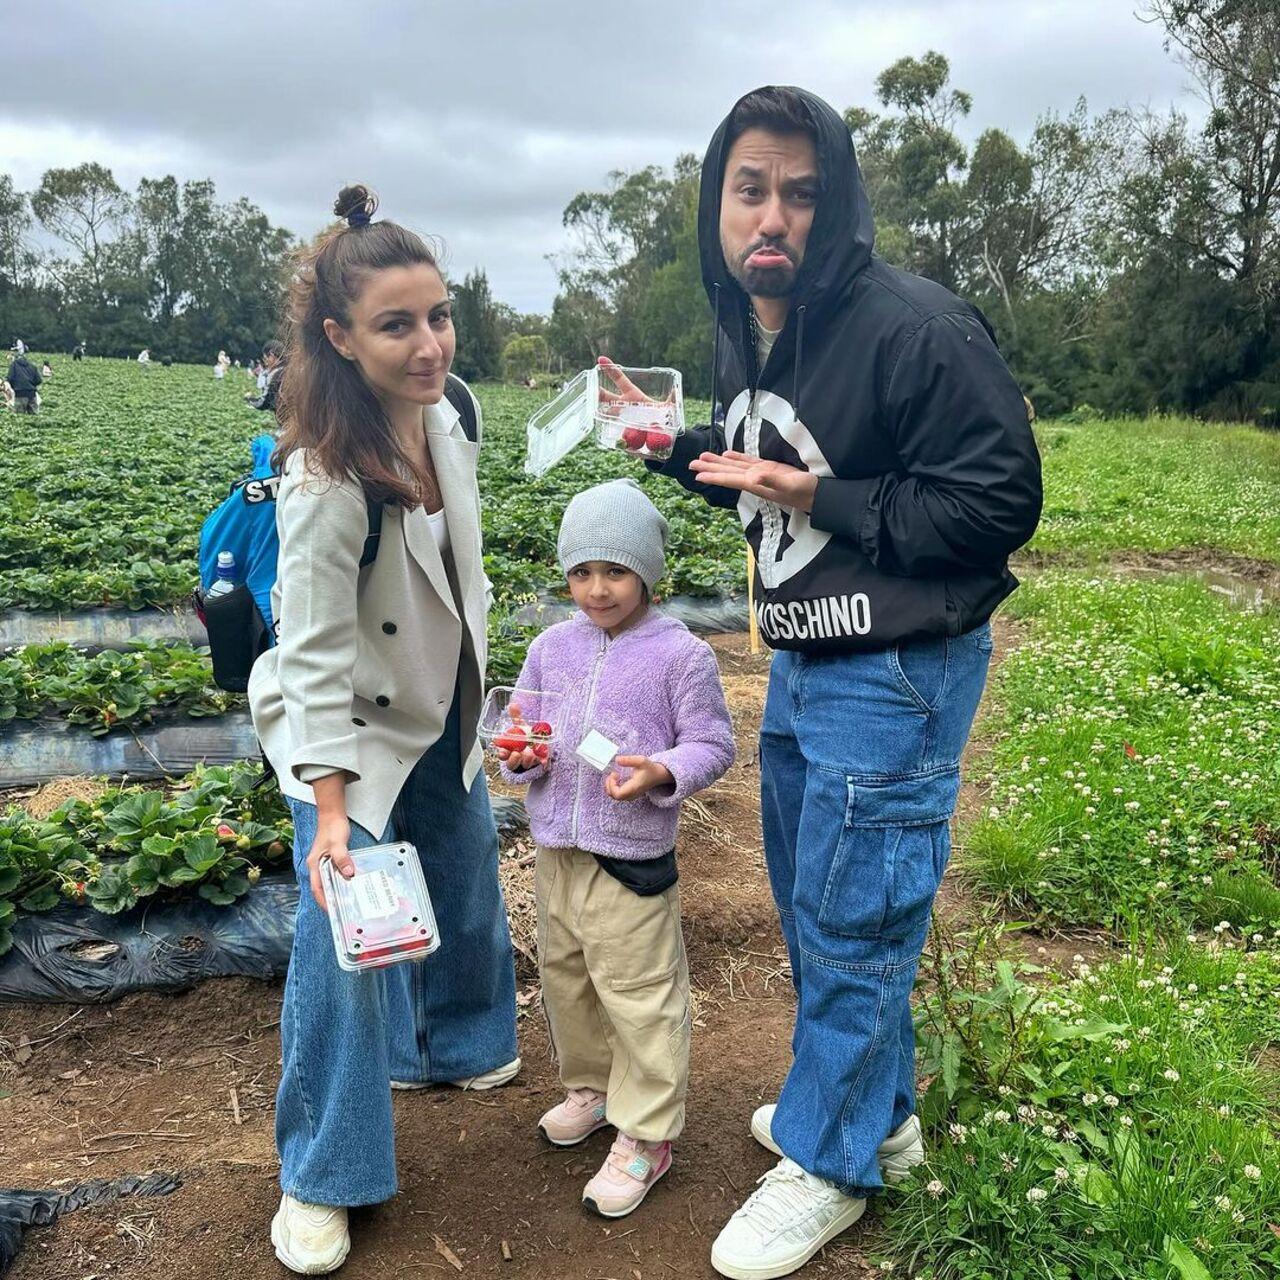 The trio also went strawberry picking at a berry farm in Australia. They were seen dressed in warm clothes indicating a cool temperature in the country